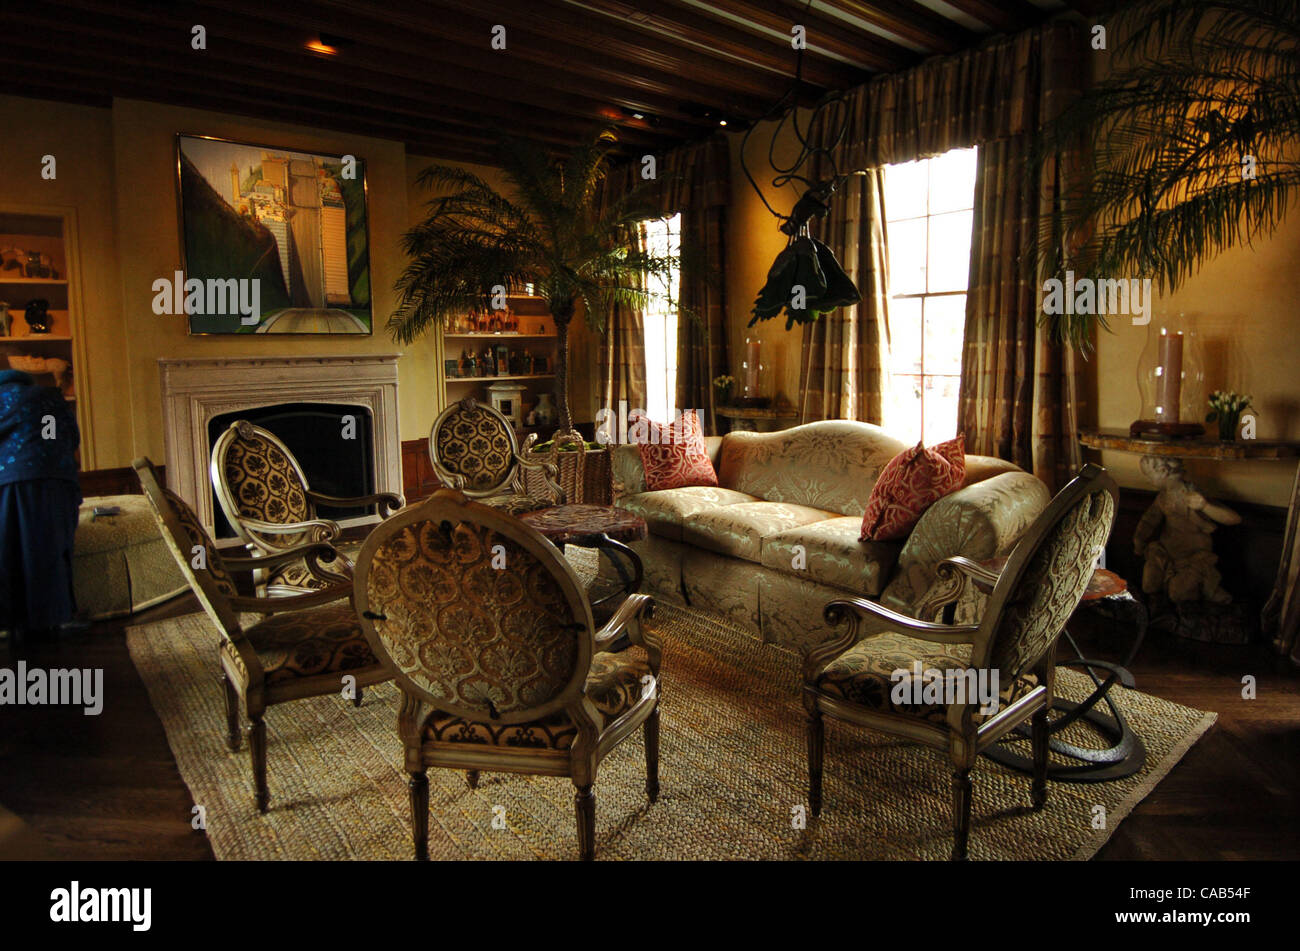 The 2004 San Francisco Decorator Showcase house is a 11,000 square foot home at 2516 Pacific, a former residence of the consul general of Great Britian. Thomas Bartlett Interiors decorated the living room, employing the color palette found in the Wayne Thiebaud painting featured above the fireplace. Stock Photo